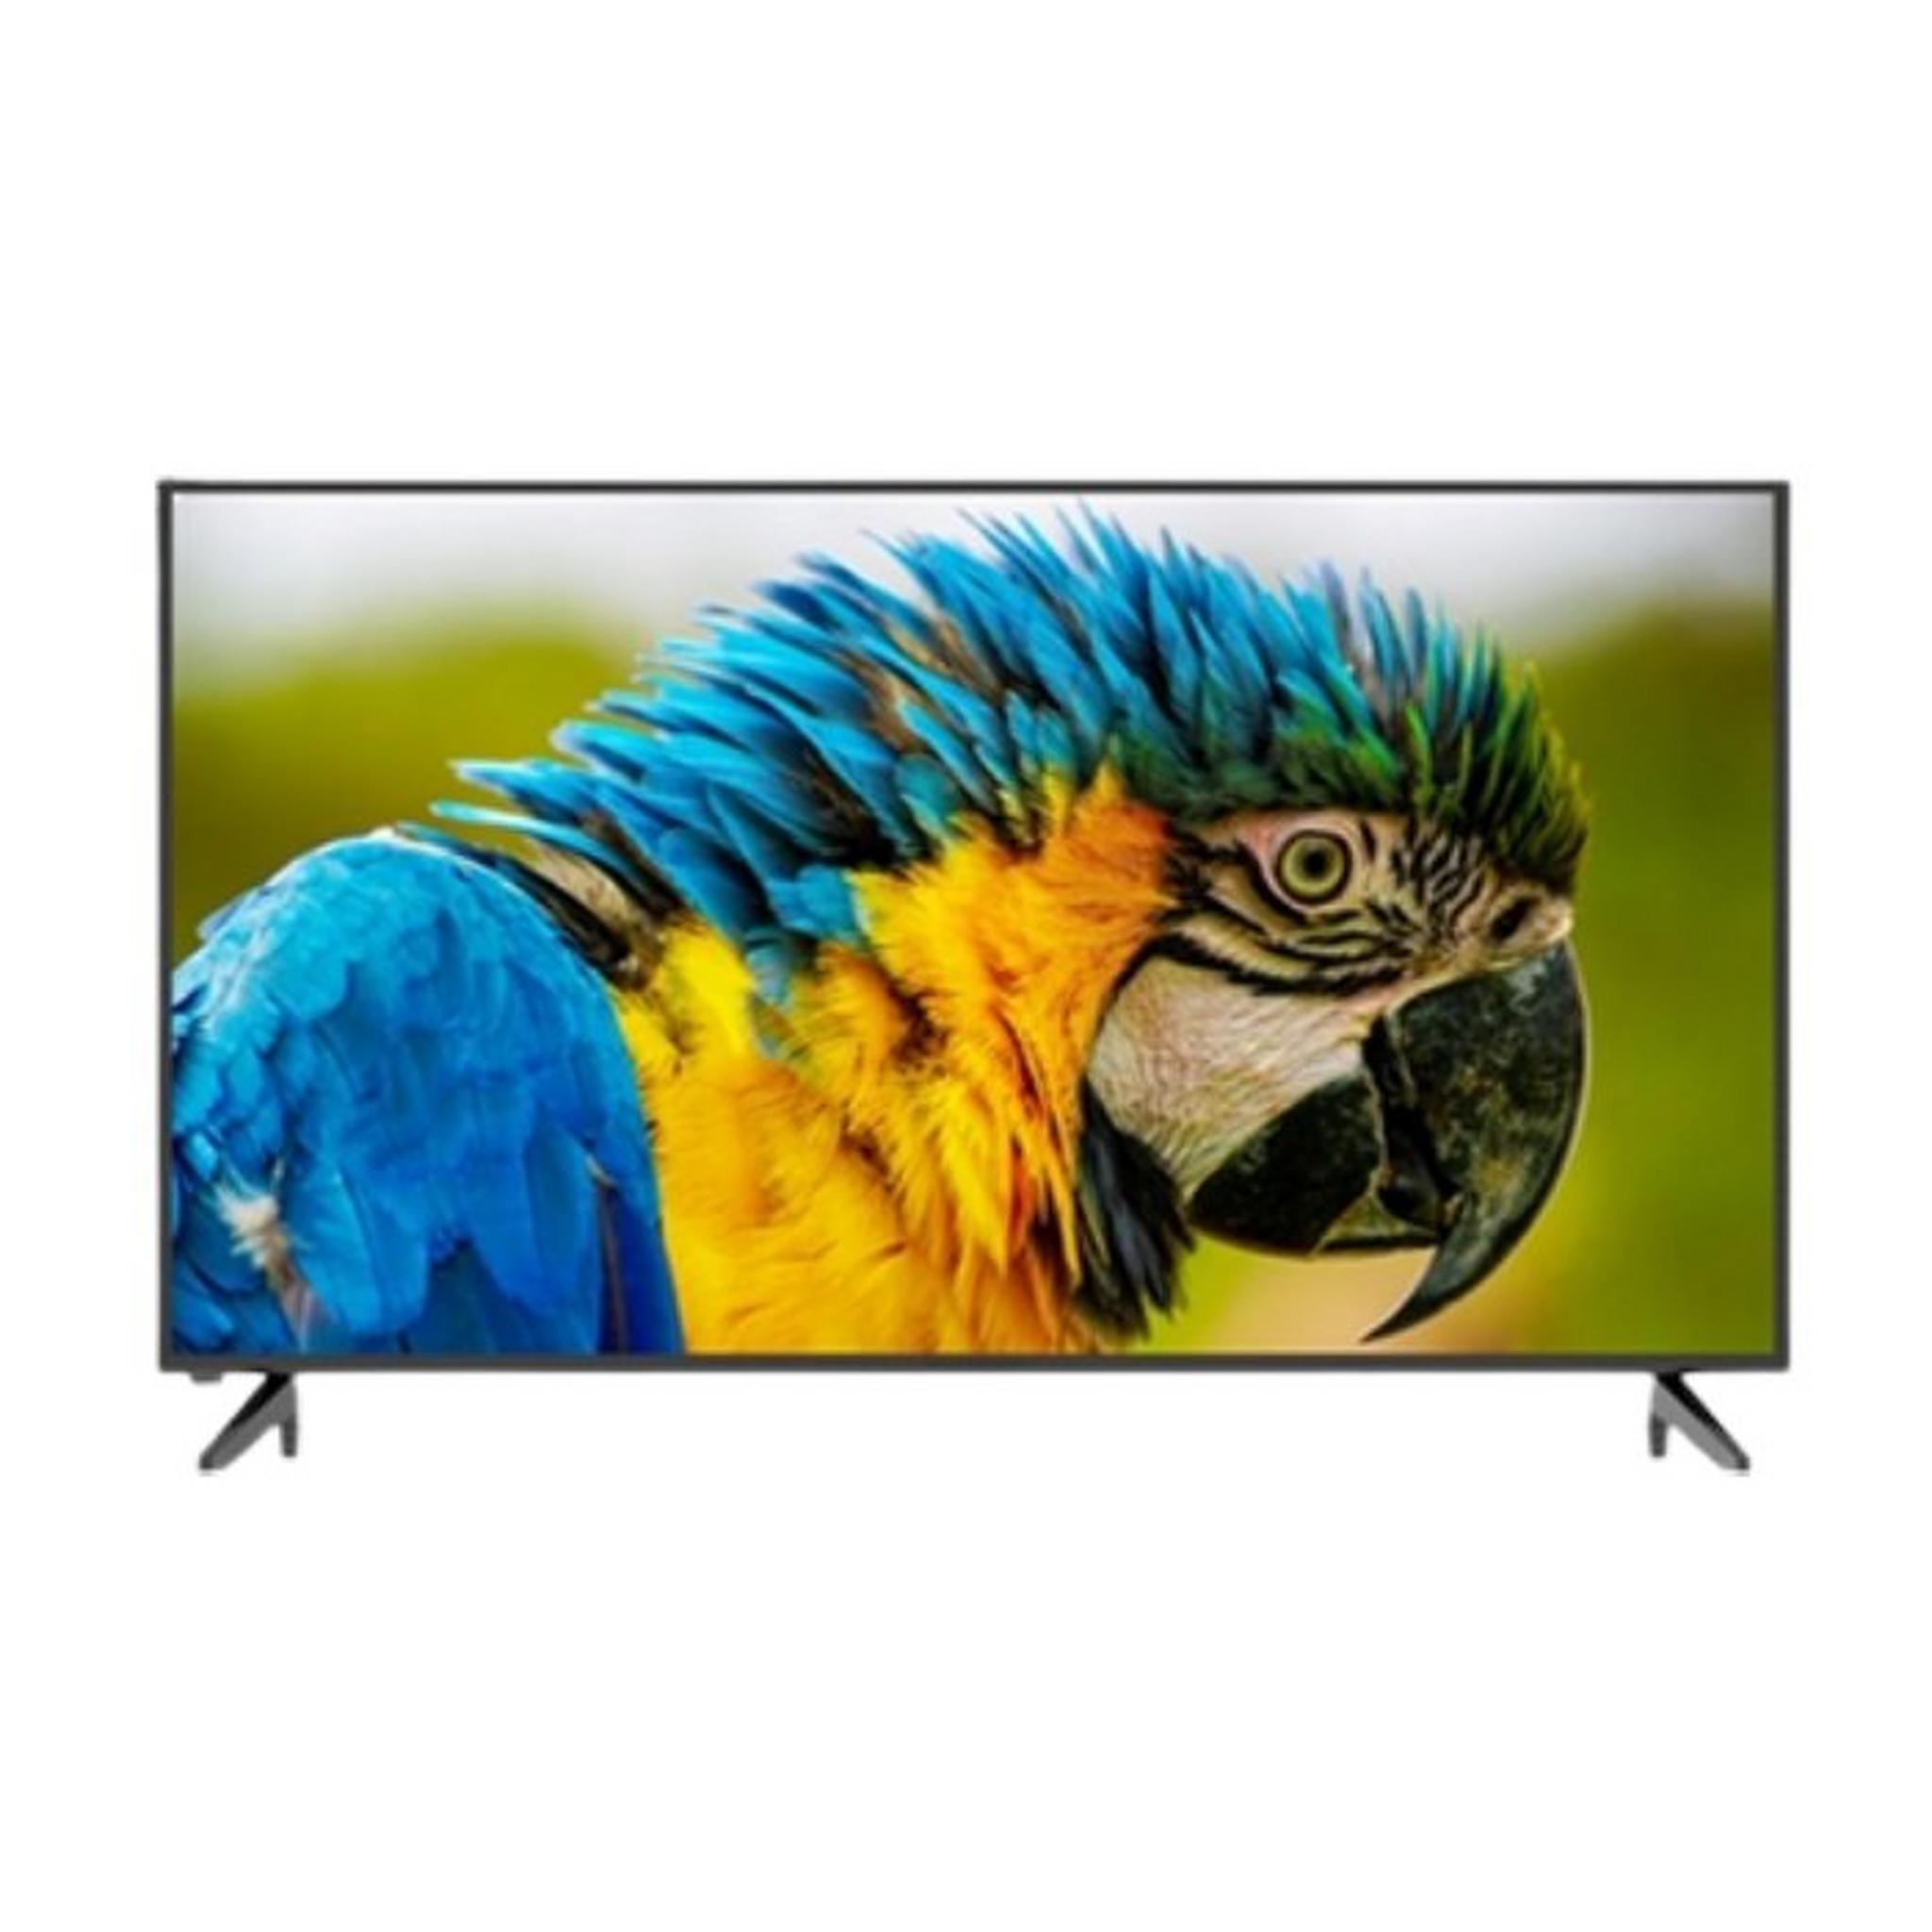 Skyworth 42-inch Android FHD LED TV (42STC6200)